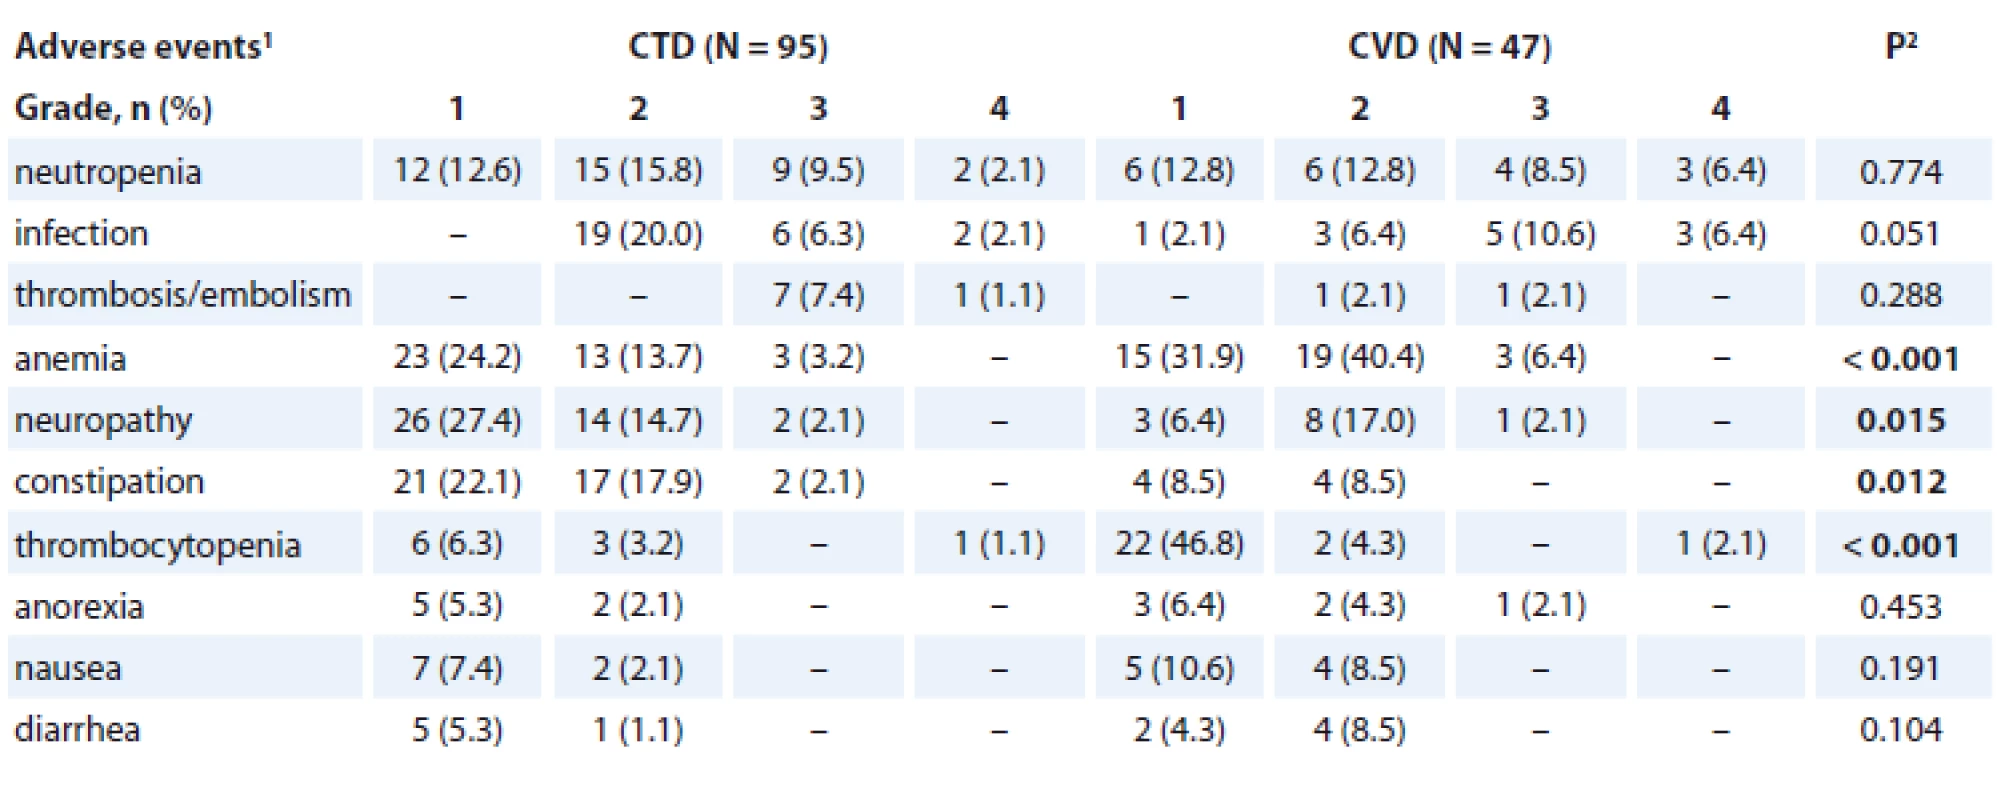 Adverse events in CTD and CVD treatment of newly diagnosed elderly multiple myeloma patients (N = 142 patients).